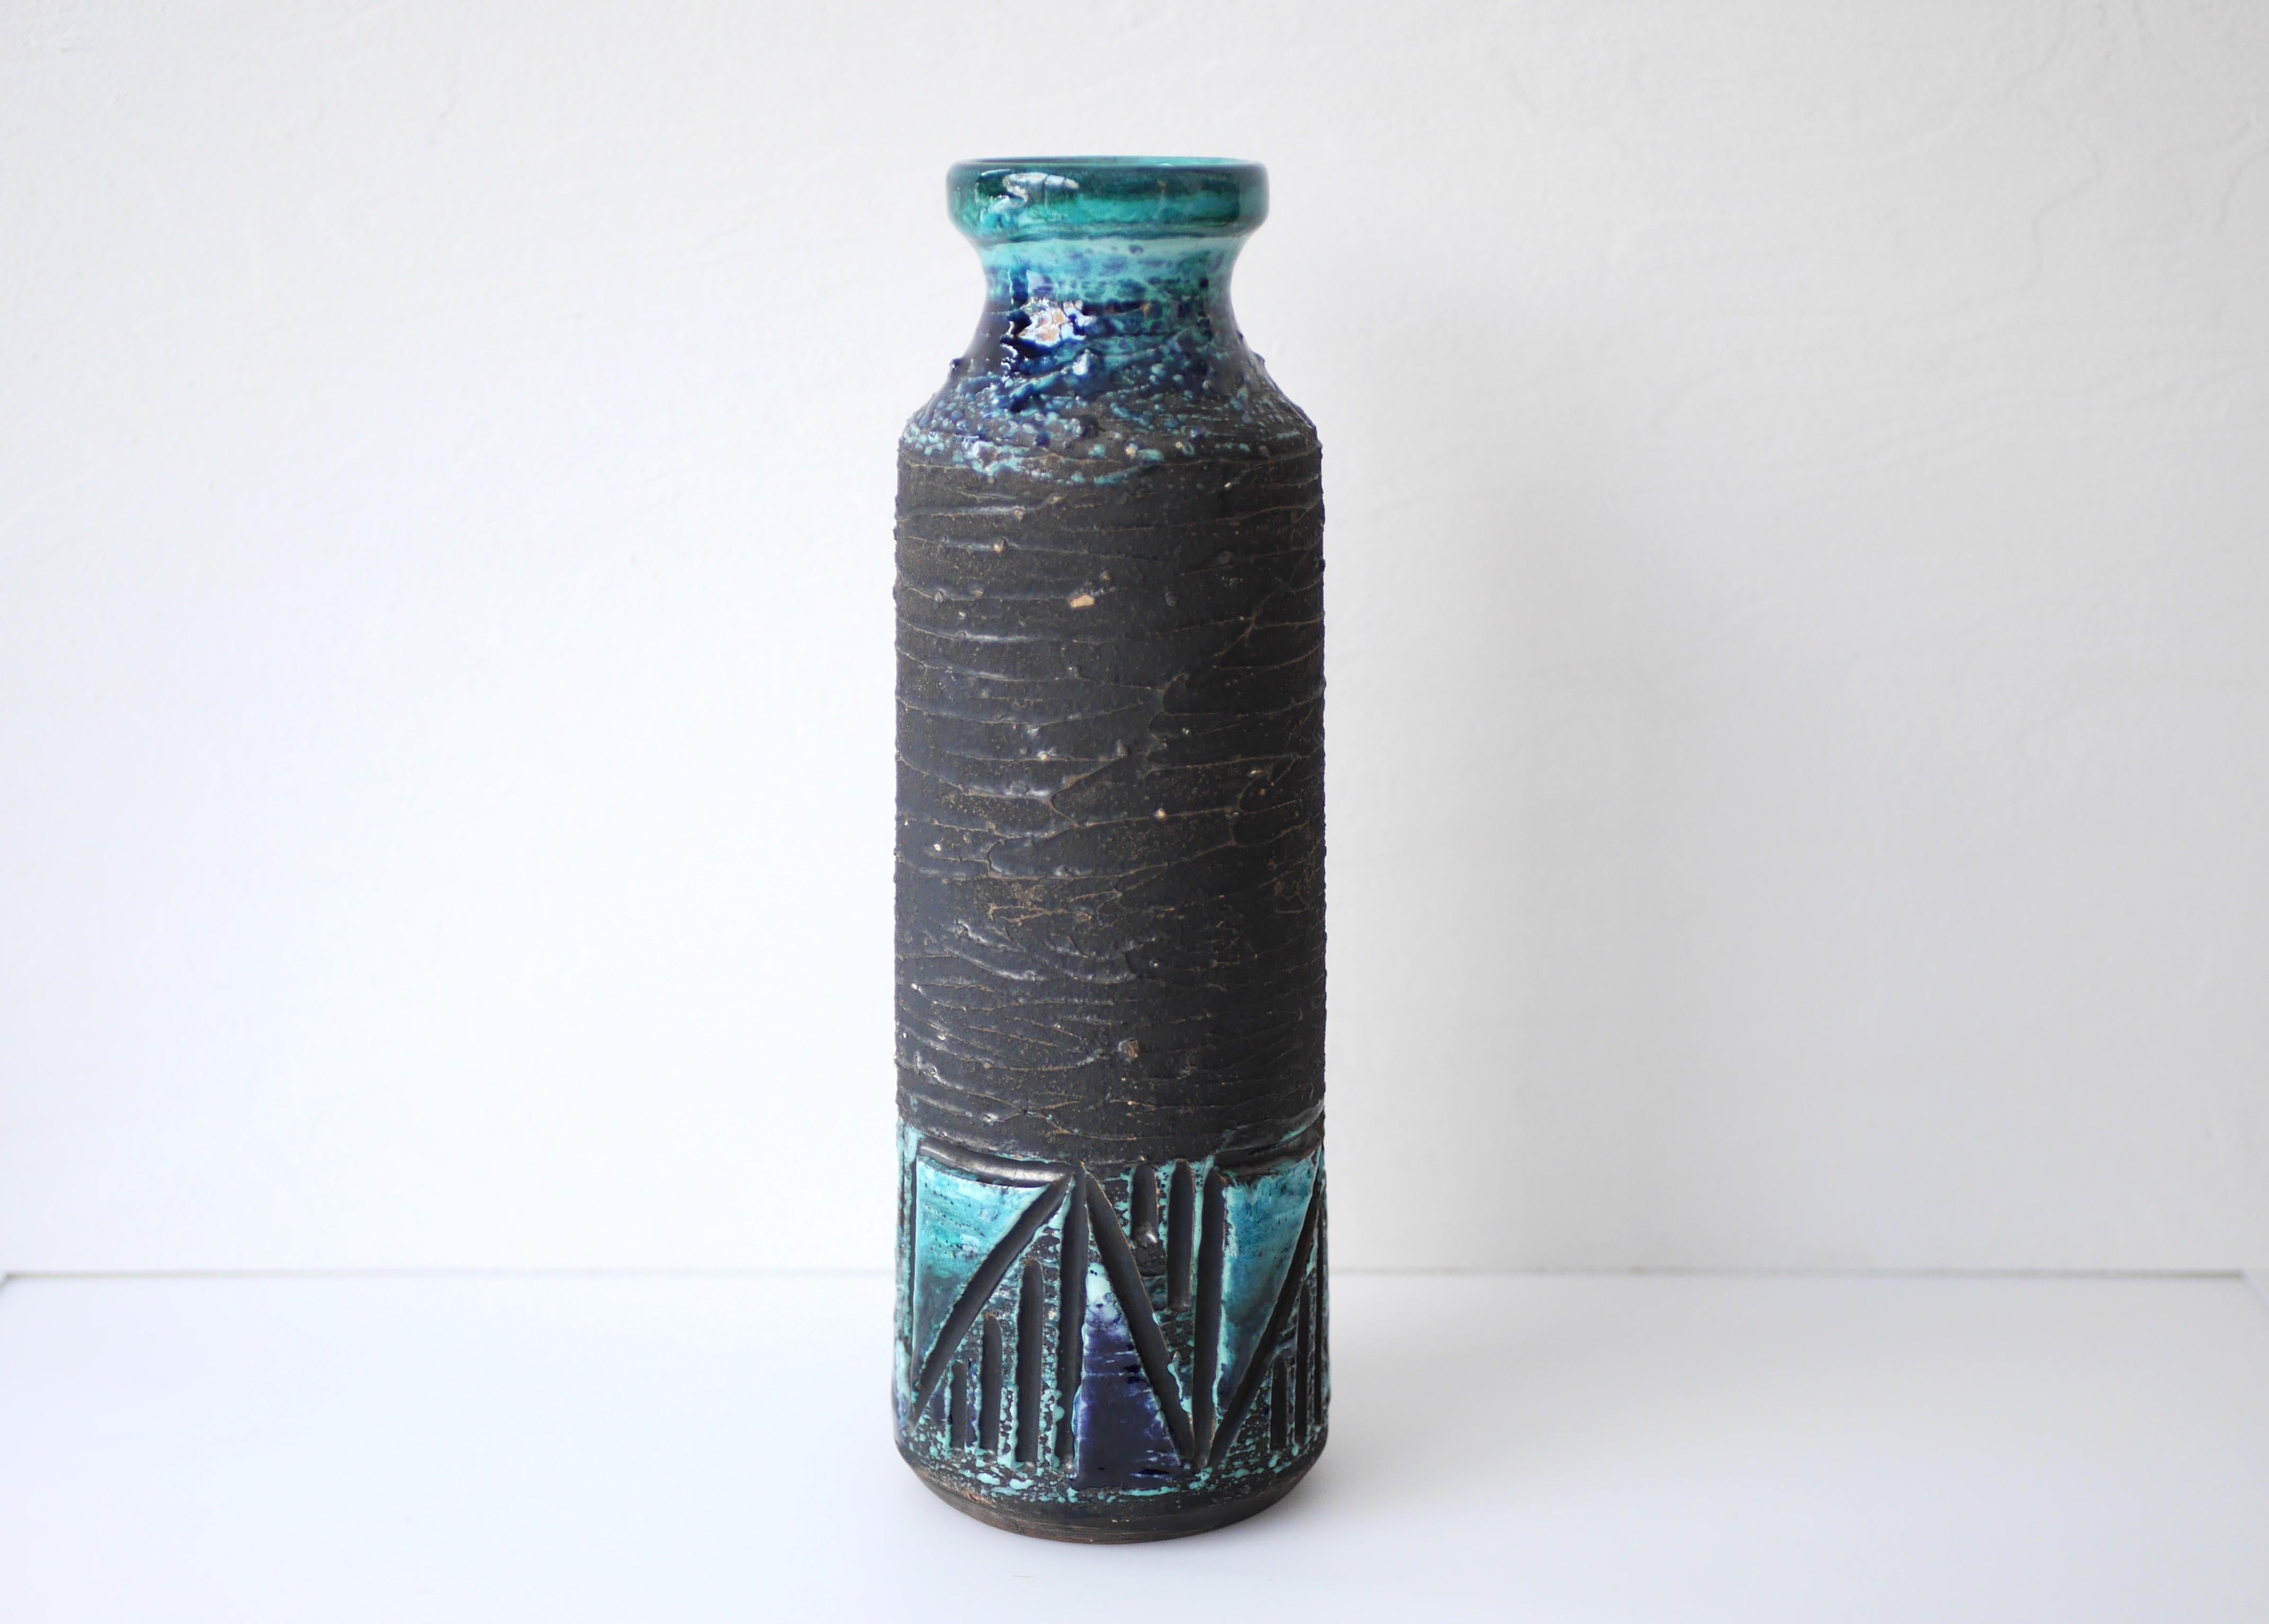 A fantastic large ceramic vase from Tilgmans, Sweden. Tilgman's ceramics are mainly known for ceramics that are decorated with so-called graffito technology. Which is the case for this vase. A combination of a rough brown surface with a graphic